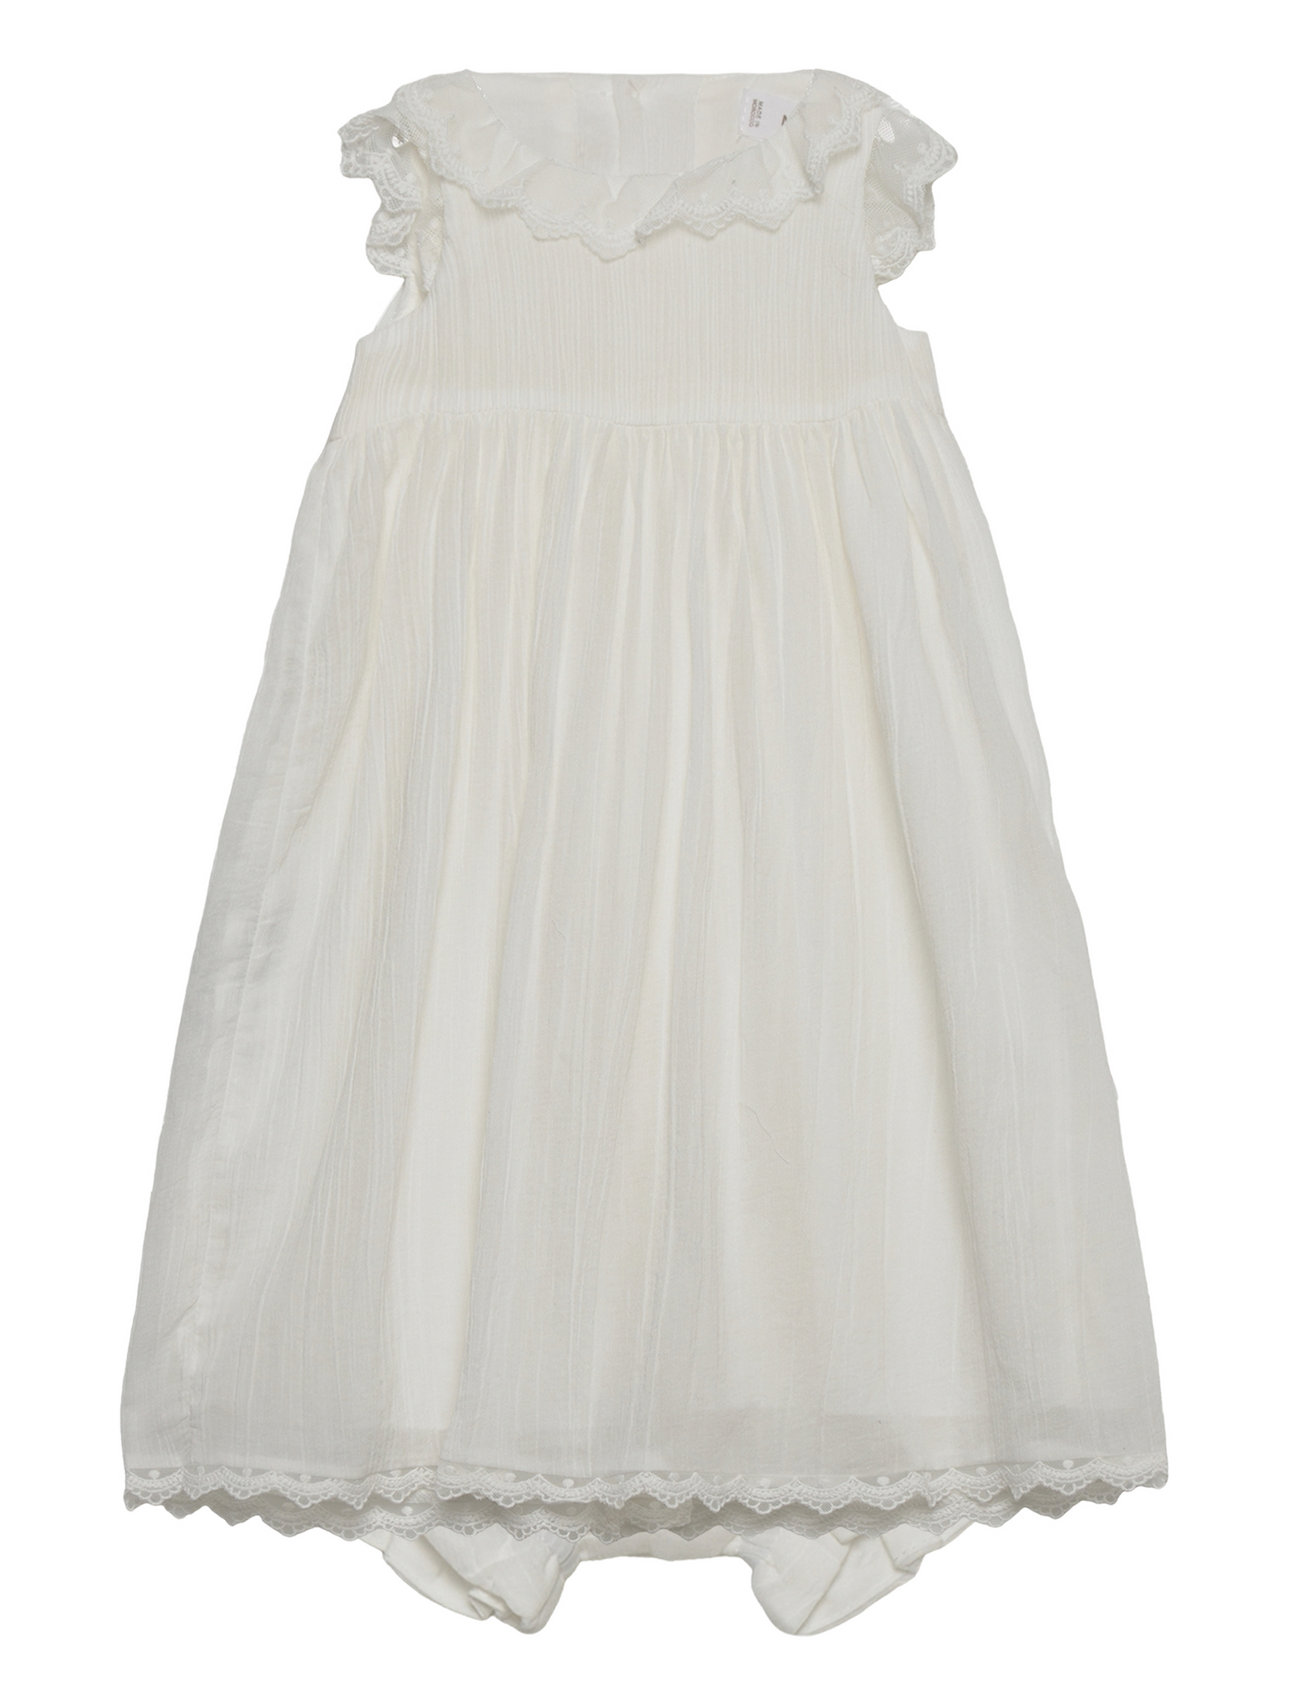 Skirt With Embroidered Details And Frog Dresses & Skirts Dresses Baby Dresses Sleevless Baby Dresses White Mango